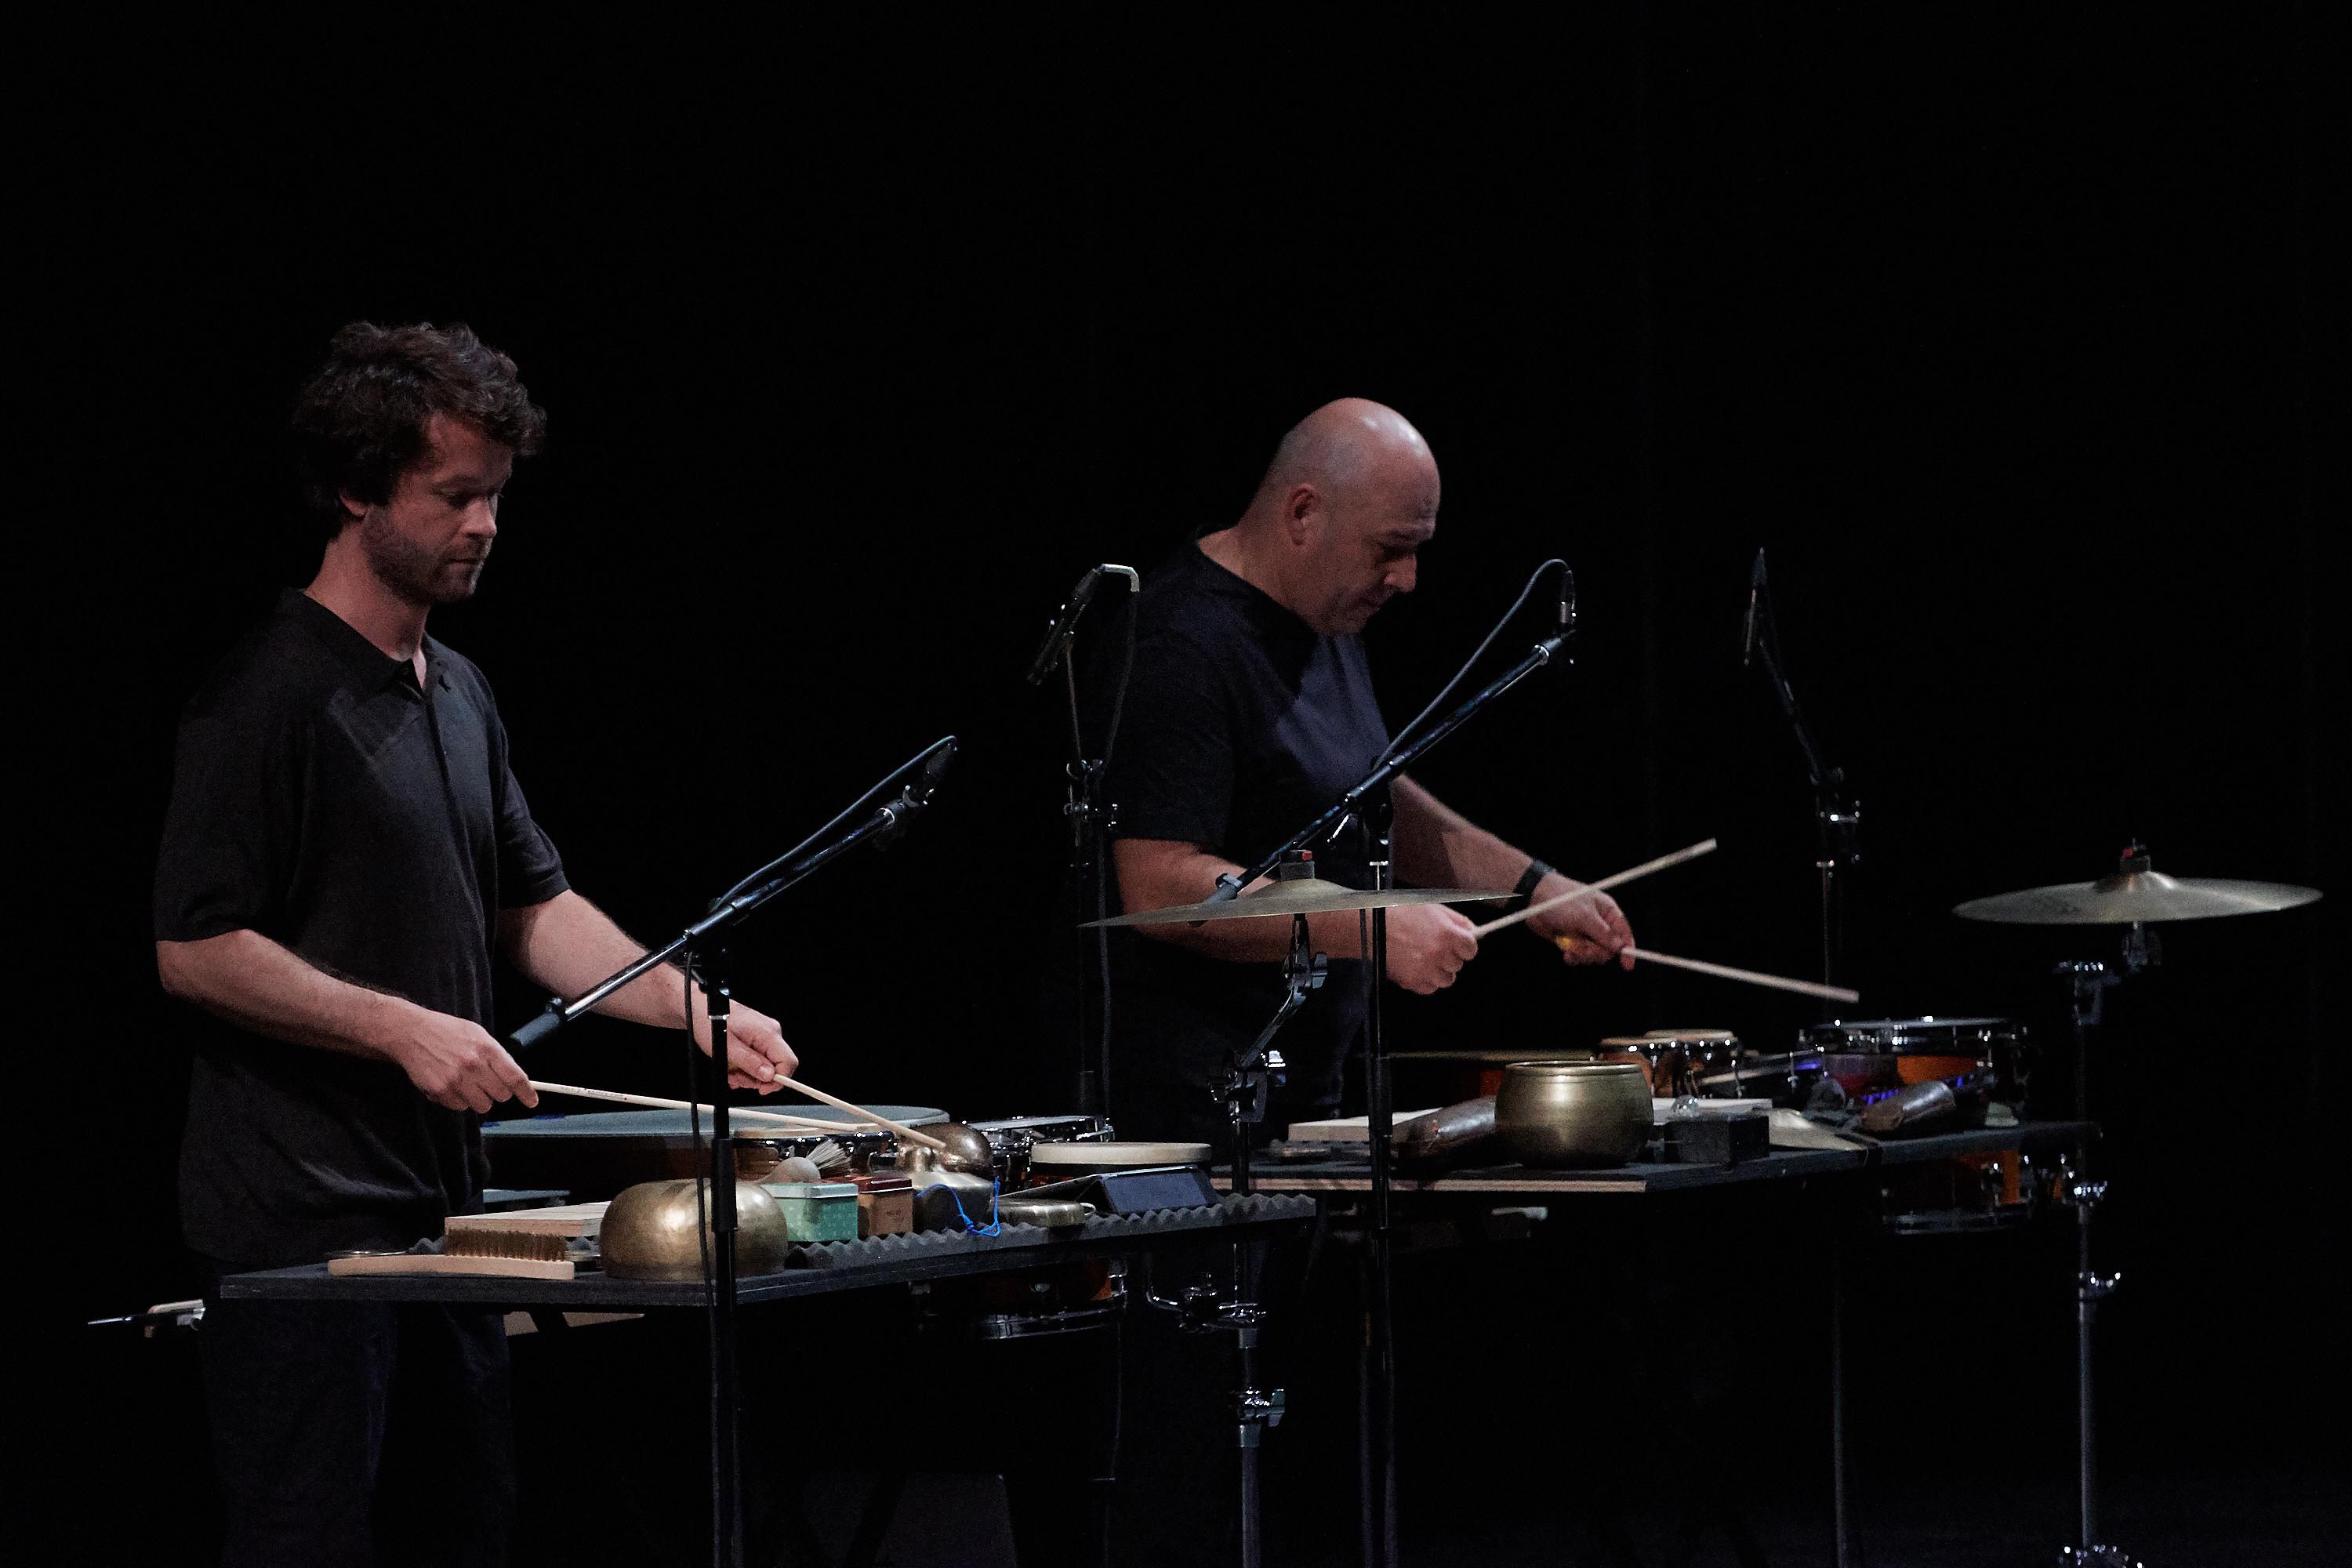 Two musicians playing percussions